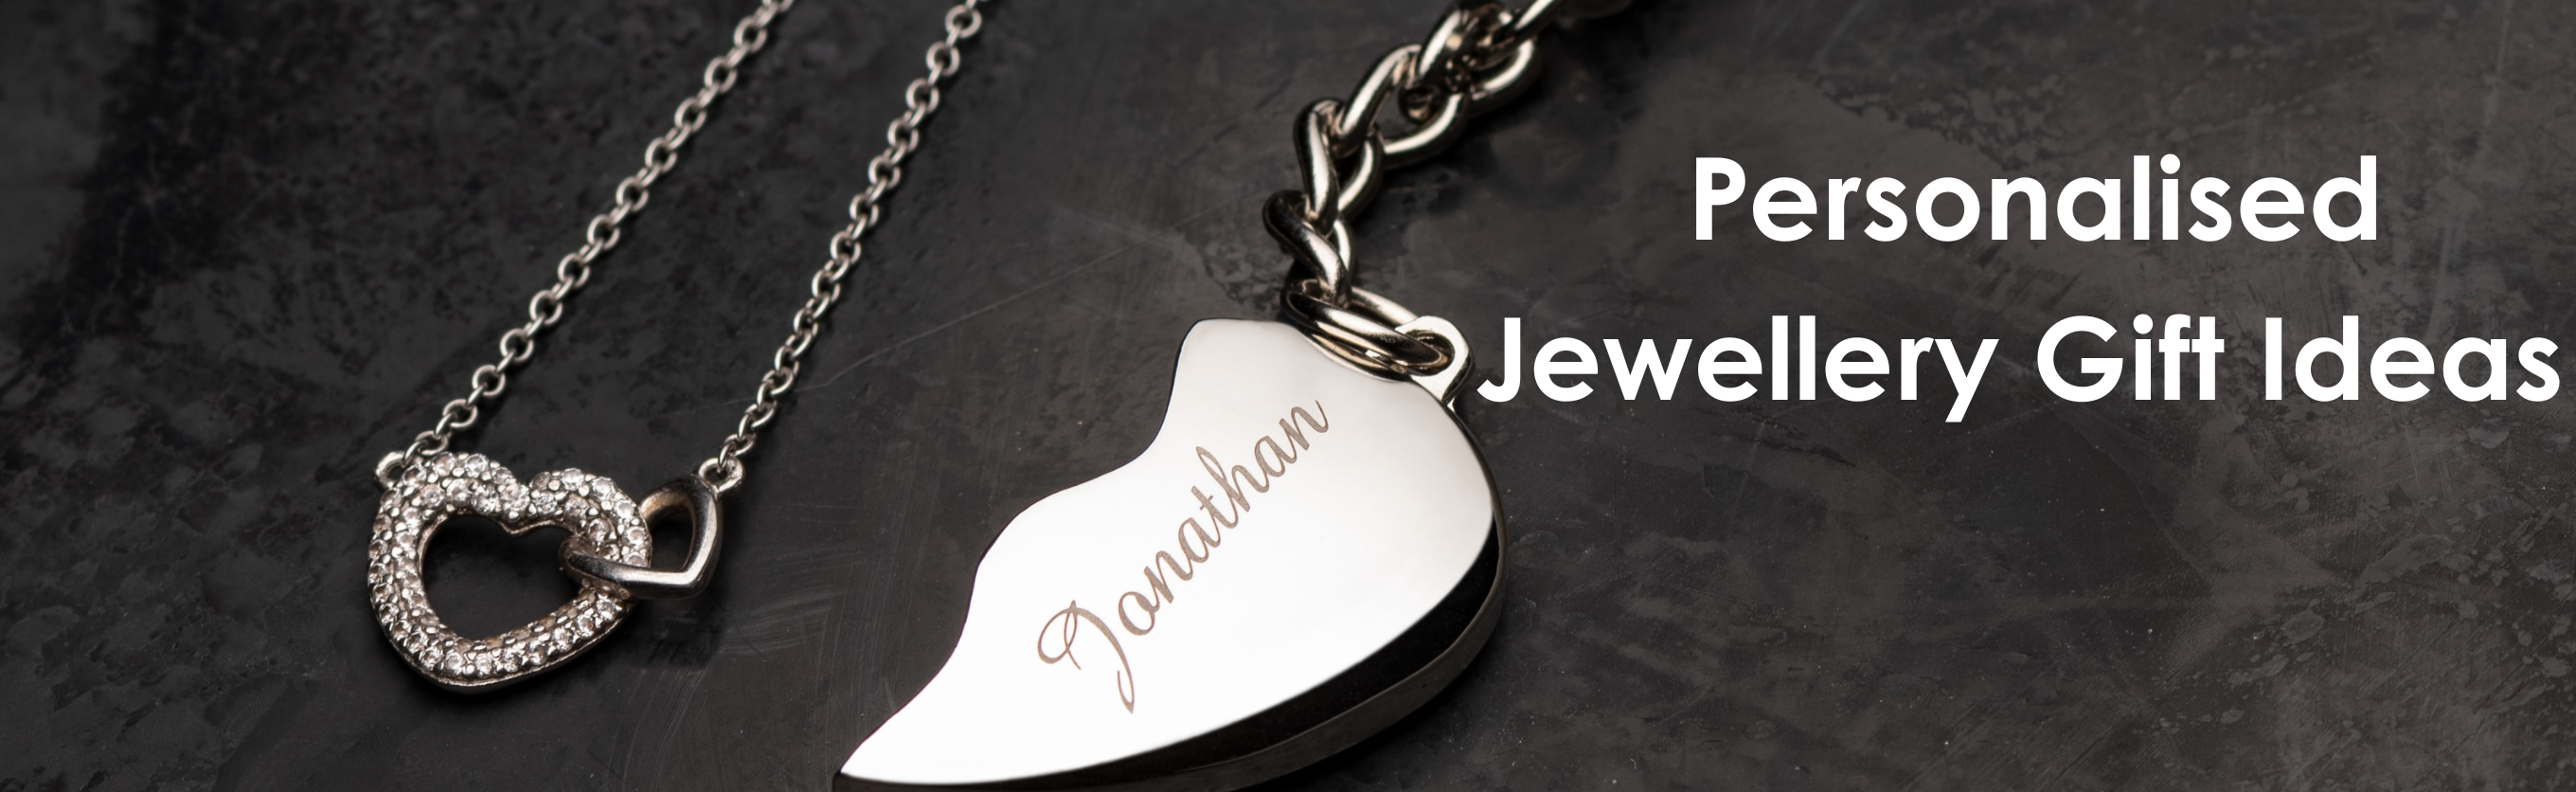 Our Guide to Personalised Jewellery Gift Ideas